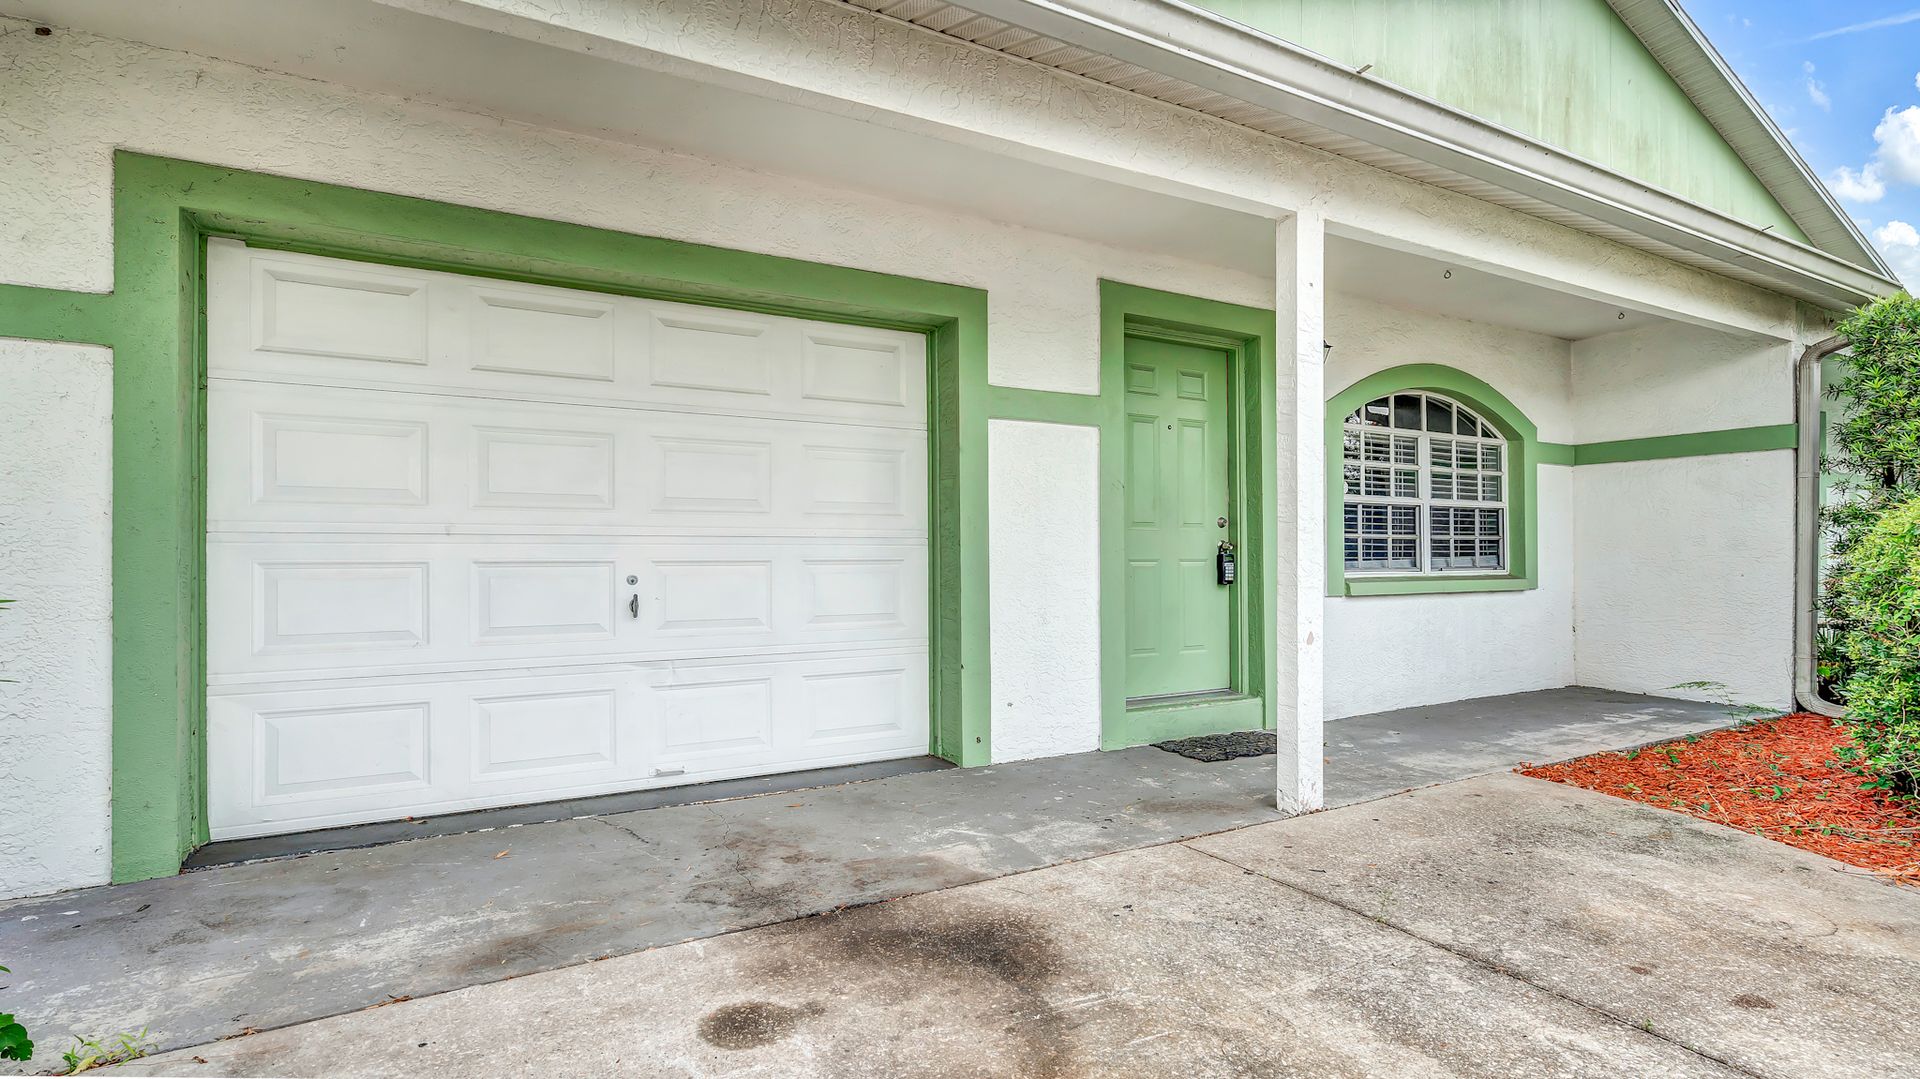 Beautifully renovated 3 bedroom 2 bath home in Tampa